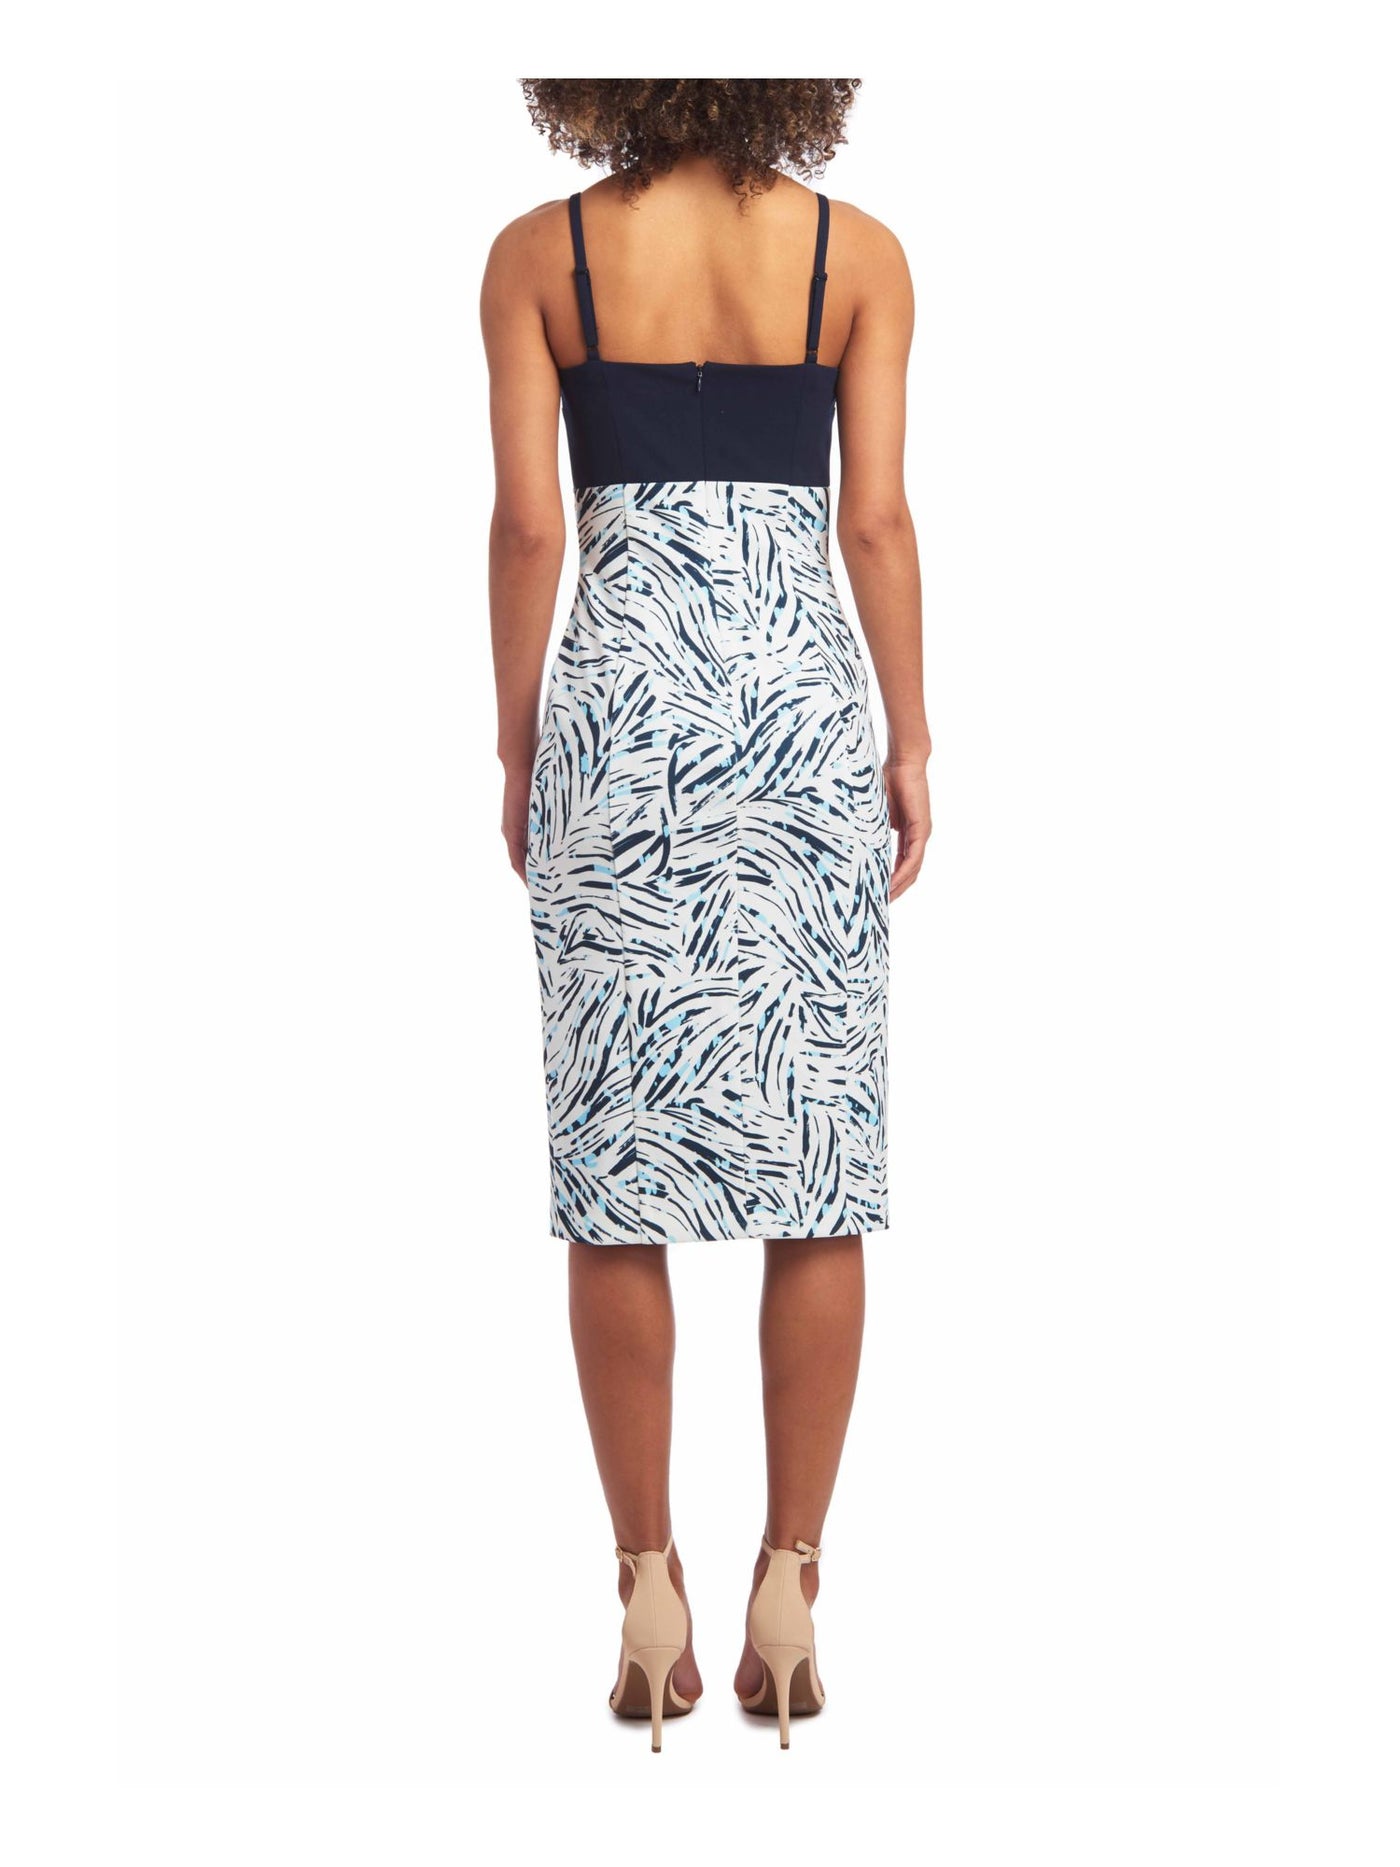 CHRISTIAN SIRIANO Womens Navy Zippered Slitted Adjustable Straps Printed Spaghetti Strap Sweetheart Neckline Below The Knee Evening Sheath Dress M